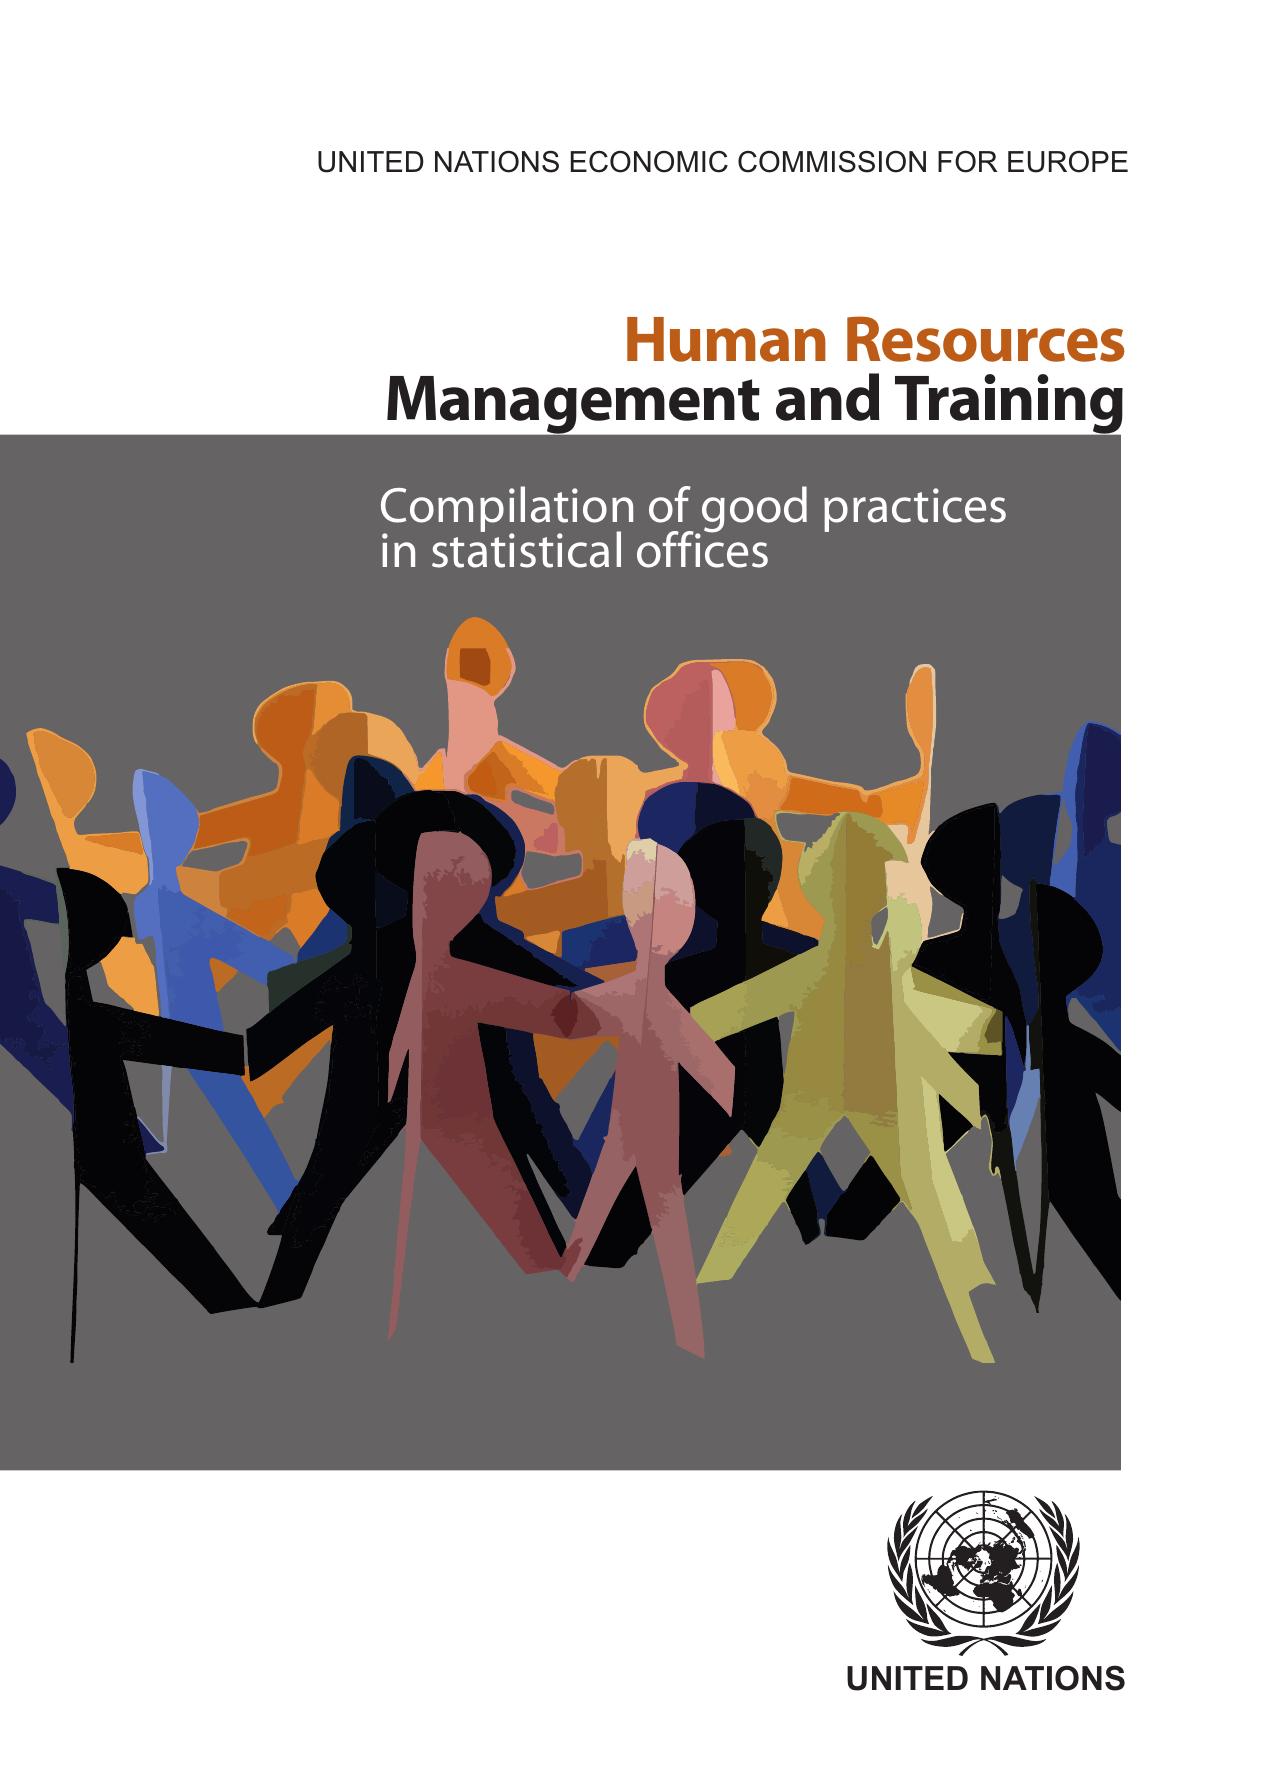 Human Resource Management and Training